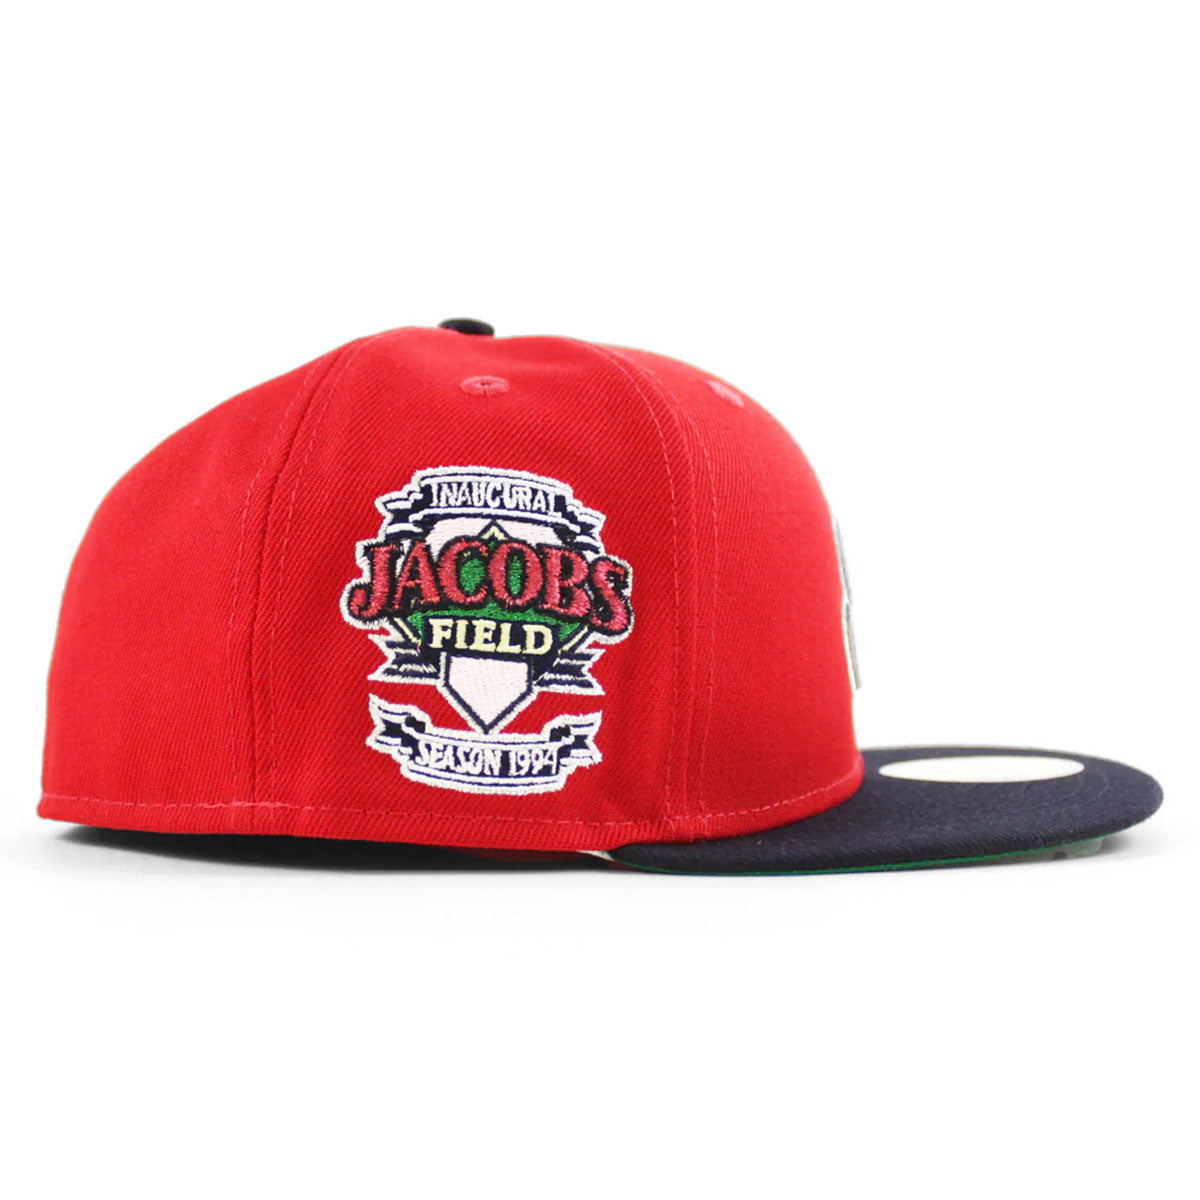 NEW ERA Cleveland Indians - 59FIFTY JACOBS FIELD SCARLET NAVY